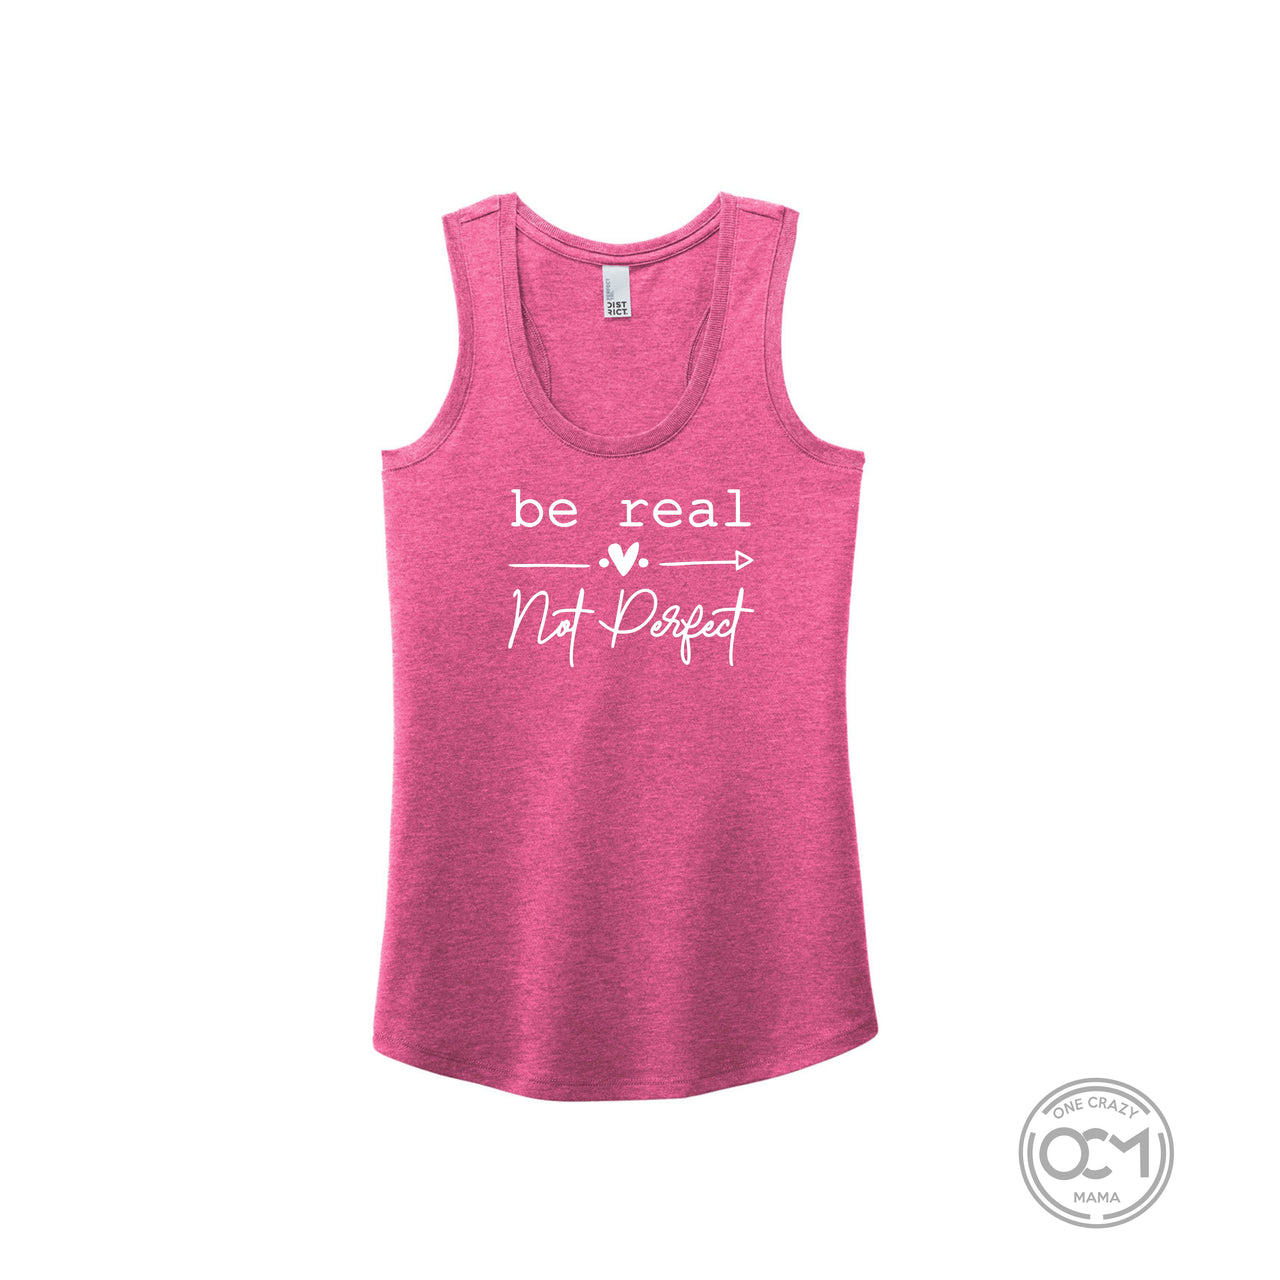 Ladies - Perfect Tri ® Racerback Tank - (Be Real Not Perfect)